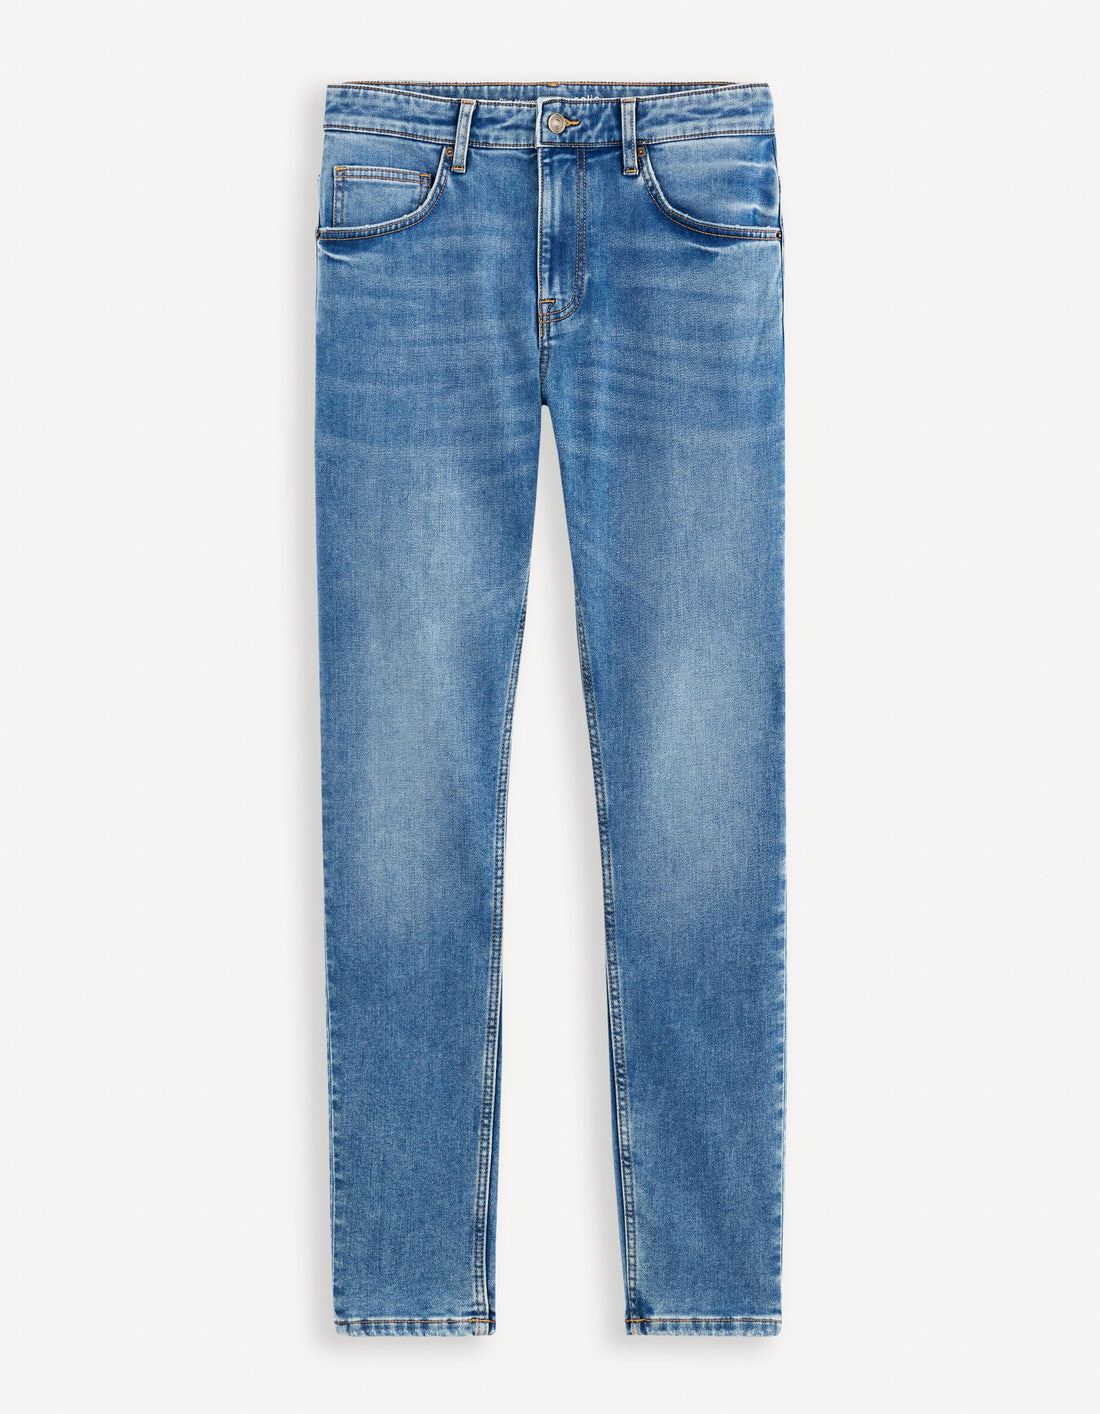 C25 Slim Stretch Jeans_FOACTIVE_BLEACHED_01